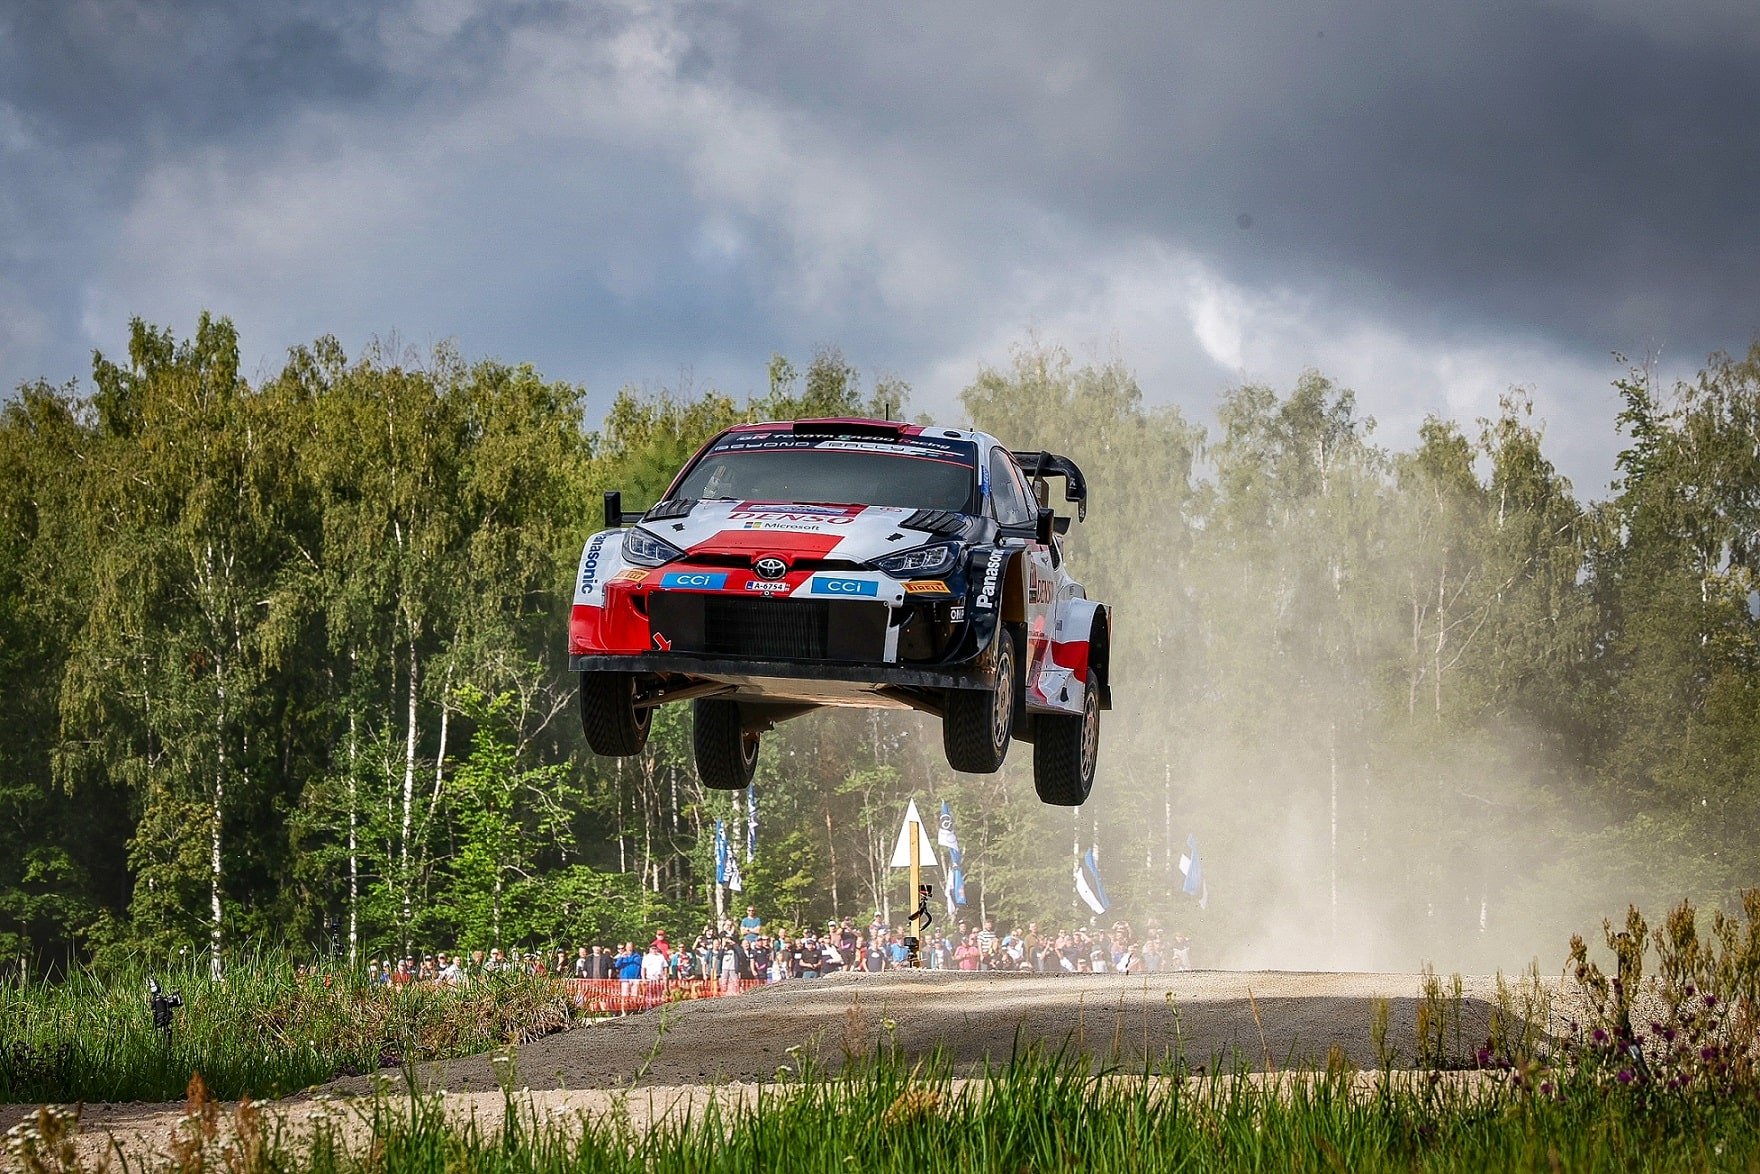 Jeddah, Saudi Arabia– 31 July 2023: The TOYOTA GAZOO Racing (TGR) World Rally Team (WRT) recently secured yet another impressive victory this season for its GR YARIS Rally1 Hybrid Electric vehicle in the 2023 FIA World Rally Championship (WRC) at Rally Estonia. Kalle Rovanperä once again dominated the roads in the No. 69 Toyota GR YARIS Rally1 Hybrid Electric vehicle, taking home top podium position for the TOYOTA GAZOO Racing World Rally Team (TGR-WRT) for the third year in a row. Rovanperä’s peerless performance has extended his lead in the FIA World Rally Championship, while Toyota has increased its manufacturers’ championship lead to 57 points. Guided by co-driver Jonne Halttunen, Rovanperä once again maneuvered his No. 69 GR YARIS Rally1 Hybrid Electric vehicle across some of the fastest roads in the WRC. He held a narrow lead despite having to run first on the loose gravel stages and was unbeatable thereafter as he pulled clear of the competition. He recorded a remarkable run of 13 consecutive stage wins in the last two days of the rally including the rally-ending Power Stage, becoming the first driver to have such a streak of fastest times on a WRC round in 15 years. Quickest in the final leg of the race by two seconds, he secured his second win of the season by 52.7s overall and claimed the maximum 30 points to increase his standings lead to 55 points. The victory is his 10th in the WRC in the two years since he became its youngest-ever winner at Rally Estonia 2021. Akio Toyoda, TGR-WRT Chairman, commented: “Kalle, Jonne, congratulations on your victory, and three consecutive wins at Rally Estonia! Two years ago, it was Estonia where Kalle, 20 years old at the time, became the youngest WRC winner. Until then, the youngest winner record was held by Jari-Matti, at 22 years old. And now, 22-year-old Kalle has already won 10 WRC events. I would also like to congratulate him for becoming the youngest double-digit winner. The next WRC round is held in our hometown, Jyväskylä, Finland. I will head to Finland fully prepared for the team to carry the good momentum from Kenya and Estonia into the next round. We need to win. We will win!” Over the years, Toyota has been participating in many different forms of motorsports, including Formula One, the World Endurance Championship (WEC), and the Nürburgring 24 ‎Hours endurance race. Toyota’s participation in these events was overseen by separate entities within the company until April 2015, when Toyota established TGR, ‎to consolidate all of its motorsports activities under one in-house brand. Representing ‎Toyota’s belief that ‘the roads build the people, and the people build the cars,’ TGR highlights the role of motorsports as a fundamental pillar of Toyota’s commitment to ‎making ‘ever-better’ cars. Harnessing years of experience gained under the extreme conditions of various motorsports events, TGR aims to forge new technologies and solutions that bring the freedom, adventure, and joy of driving to everyone. Abdul Latif Jameel Motors and the Saudi Automobile and Motorcycle Federation (SAMF) have jointly introduced the Gazoo Racing (GR) Saudi Driving School, reflecting Toyota's belief in the symbiotic relationship between roads, people, and cars. This initiative aims to identify exceptional Saudi talent for the GR Saudi Team and nurture their skills in four exciting disciplines: Time Attack, Hill Climb, Drift, and Autocross. Registration for the driving school is still open, and the facility is set to welcome young Saudi men and women aged 18 to 26 who share a passion for motorsports in August. The next leg of the 2023 FIA WRC is Rally Finland, which will take place from August 3-6, is the fastest rally on the calendar and a home rally for the TGR-WRT, which has its headquarters close to the service park in Jyväskylä. Race Notes: No. 69 Toyota GR YARIS Rally1 Hybrid Electric vehicle (Kalle Rovanperä & Jonne Halttunen) Position: 1st Total time: 2:36:03.1